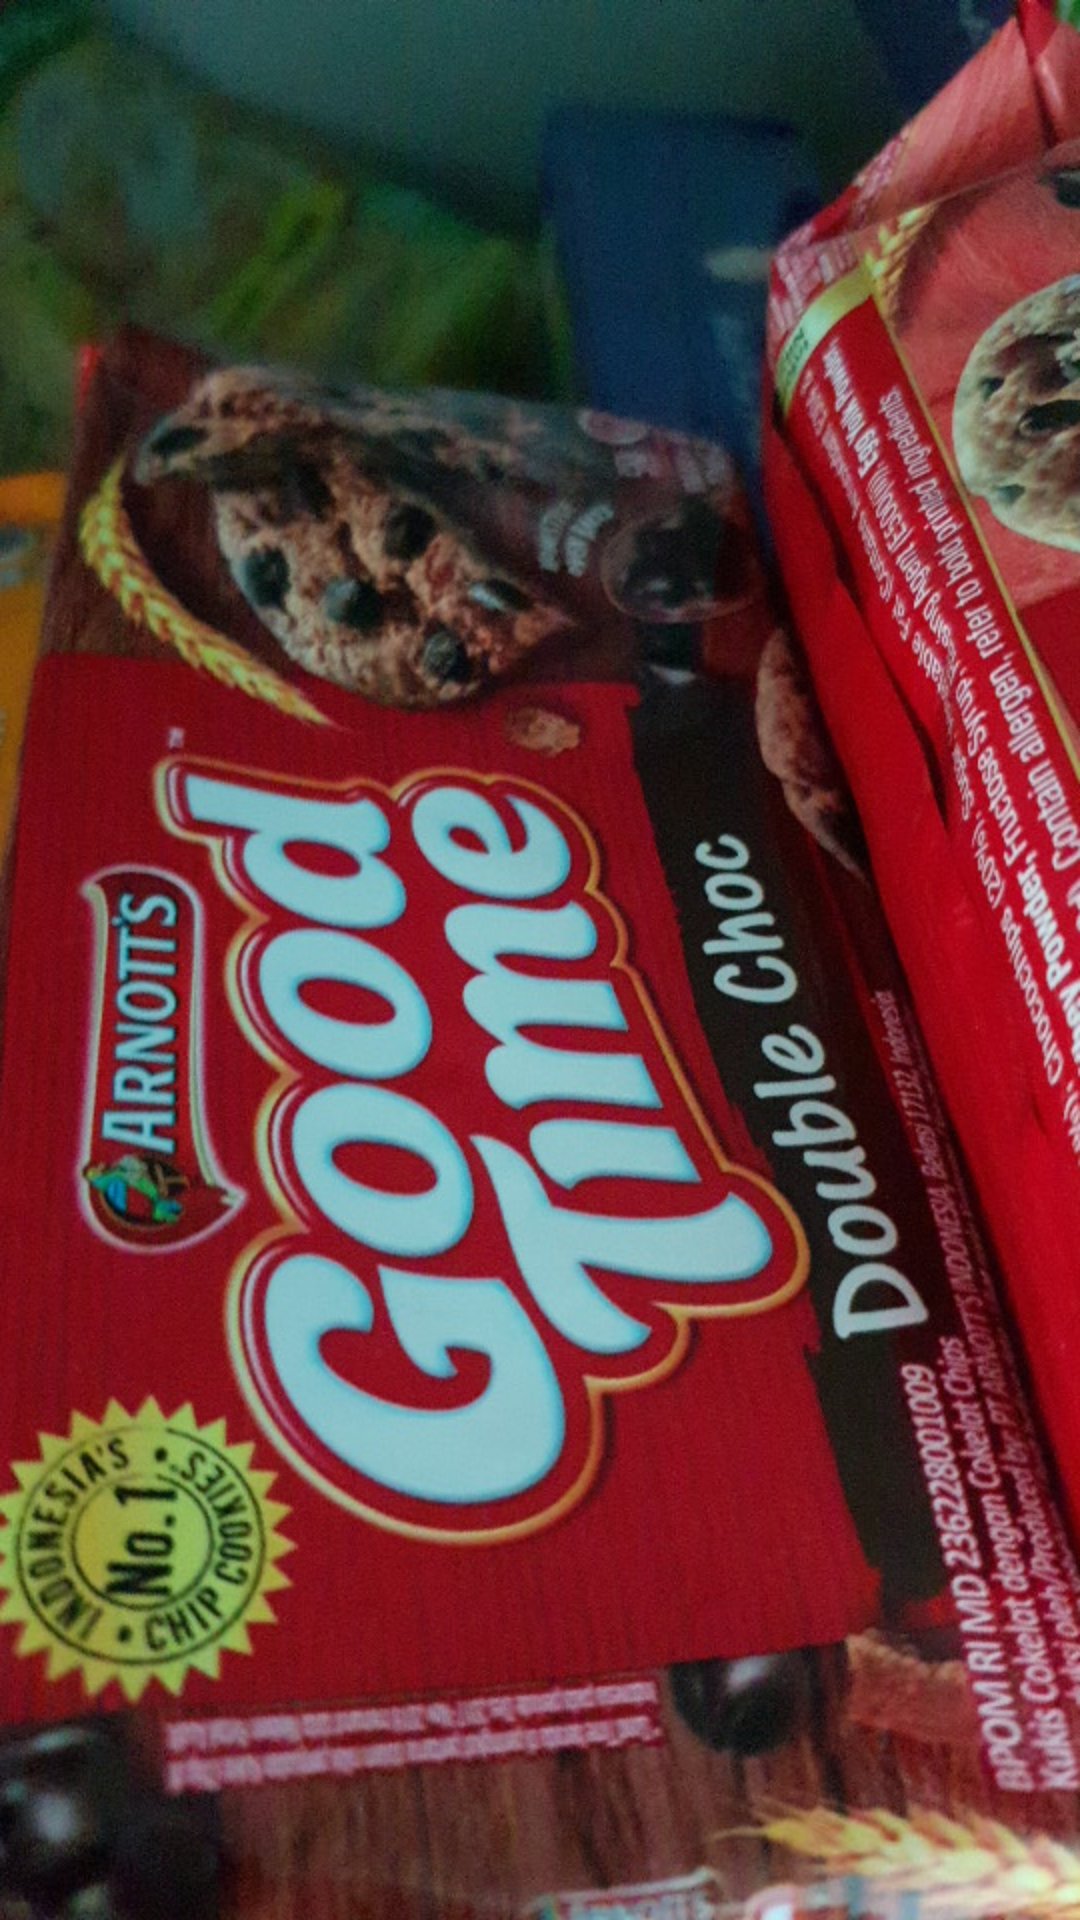 Good Time Double Choc Chocochips Cookies 72gr | Shopee ...